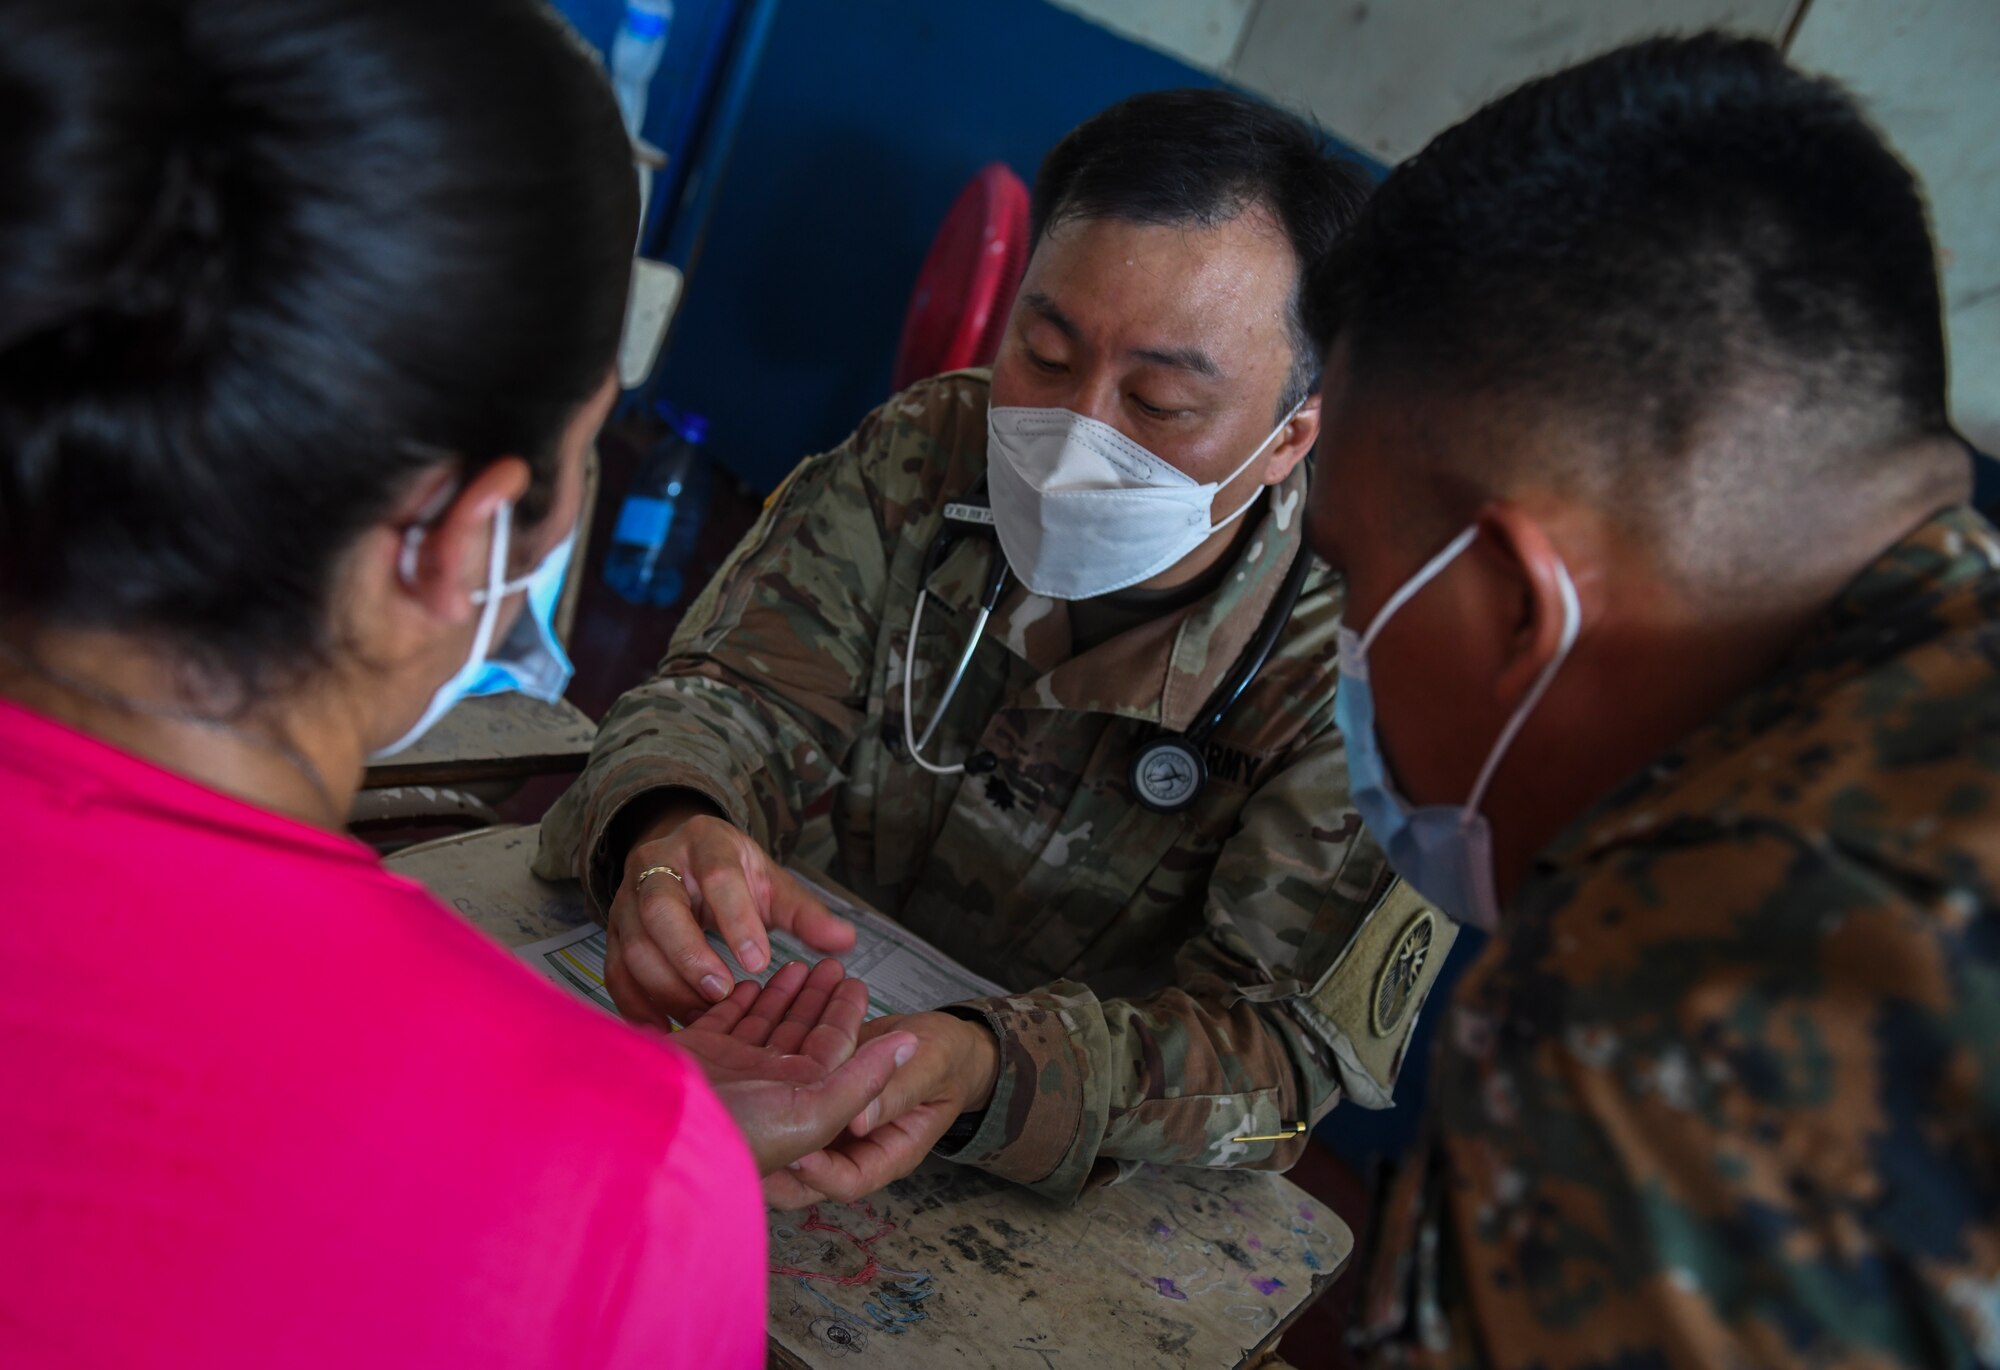 U.S. Army Lt. Col. Jeehun Kim, a medical provider with the Medical Element, Joint Task Force-Bravo, Soto Cano Air Base, Honduras, examines the hands of a patient during a medical readiness training exercise site for Resolute Sentinel 21 at Meanguera Island, El Salvador, May 14, 2021. Two medical providers saw 93 patients during the exercise.